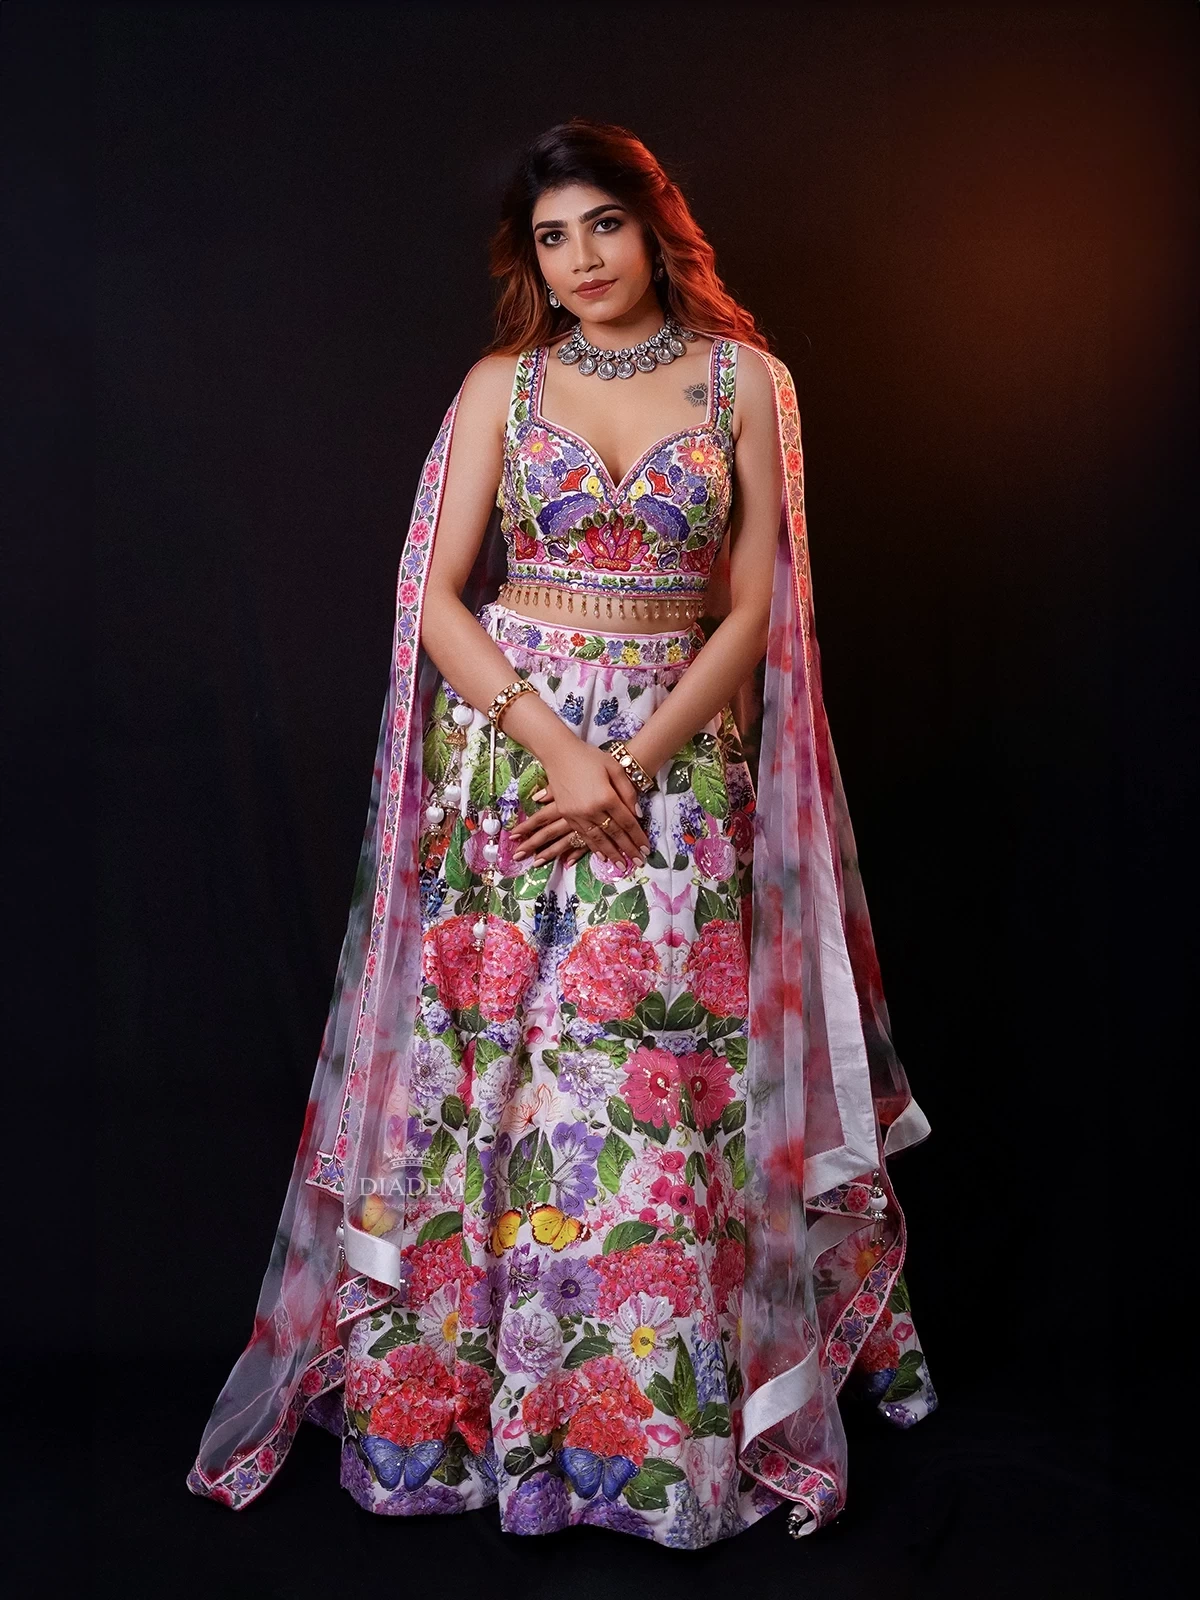 Light Pink Raw Silk Lehenga Adorned With Floral Prints And Sequins, Paired With Dupatta